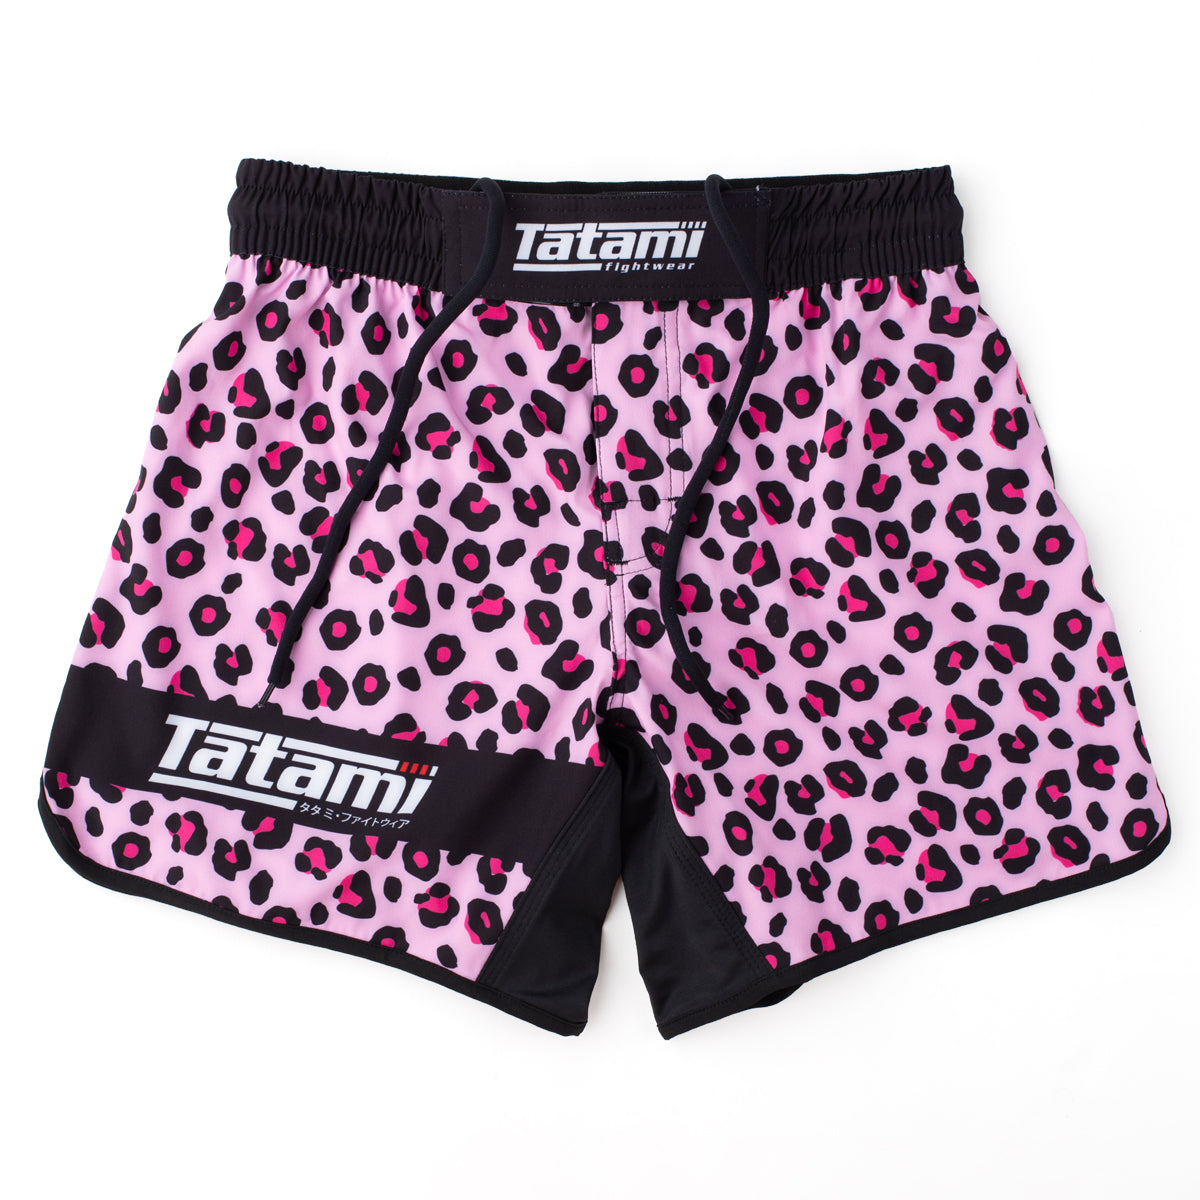 Tatami "Recharge" Fight Shorts - Leopard Pink